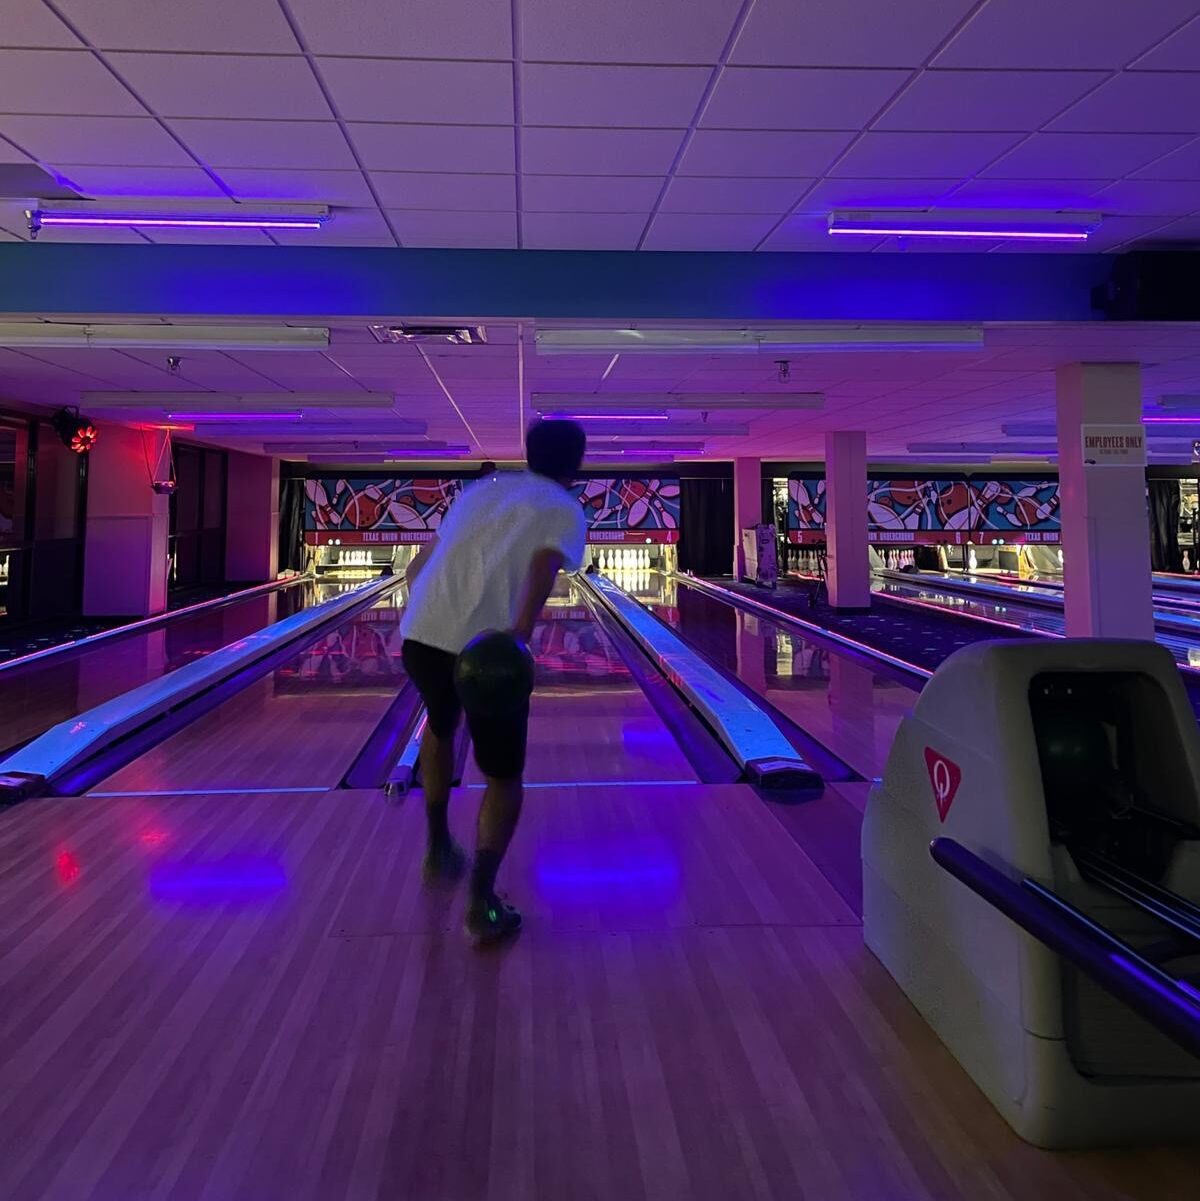 Student at the Union Underground bowling alley